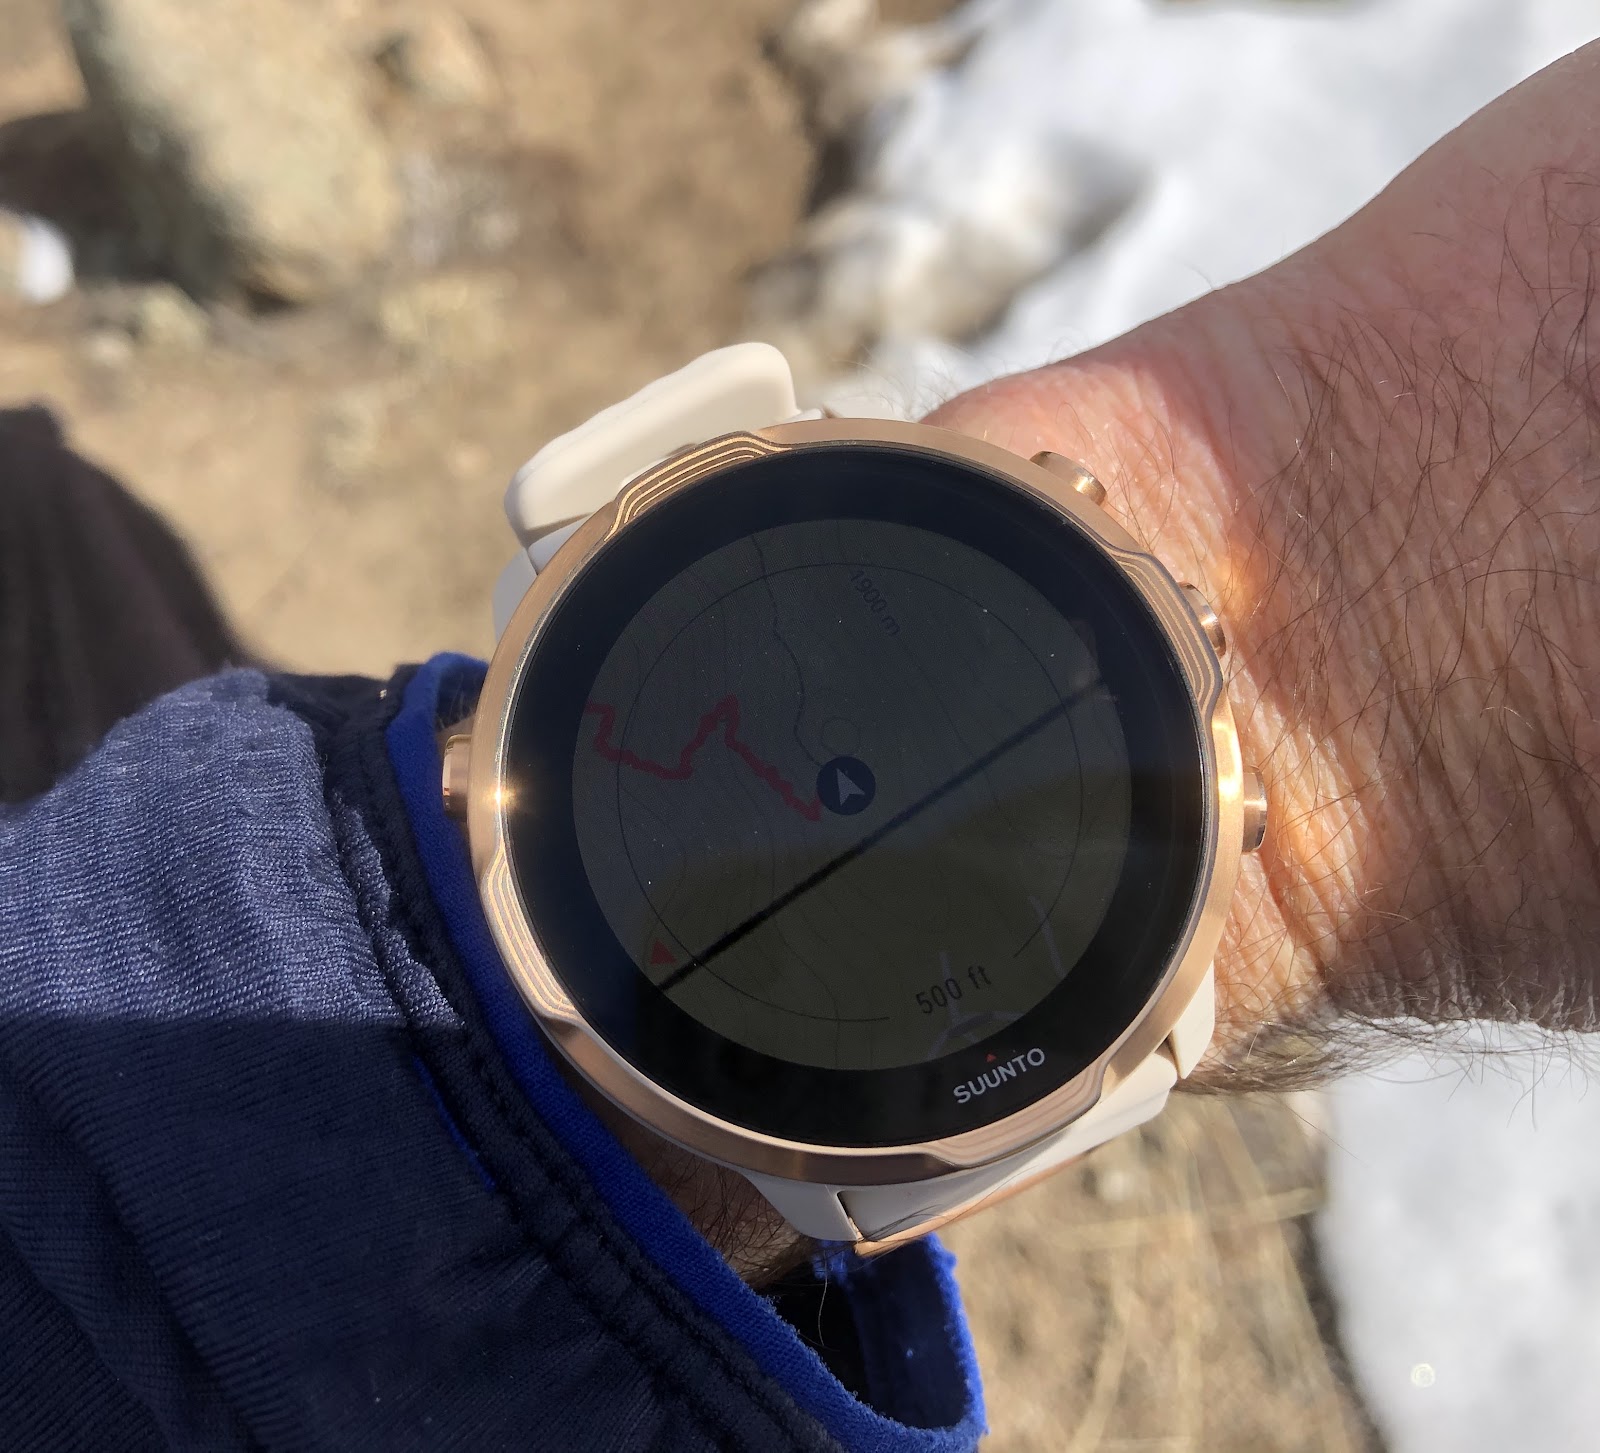 Suunto 7 with Wear OS - Hands-on details and interface walk